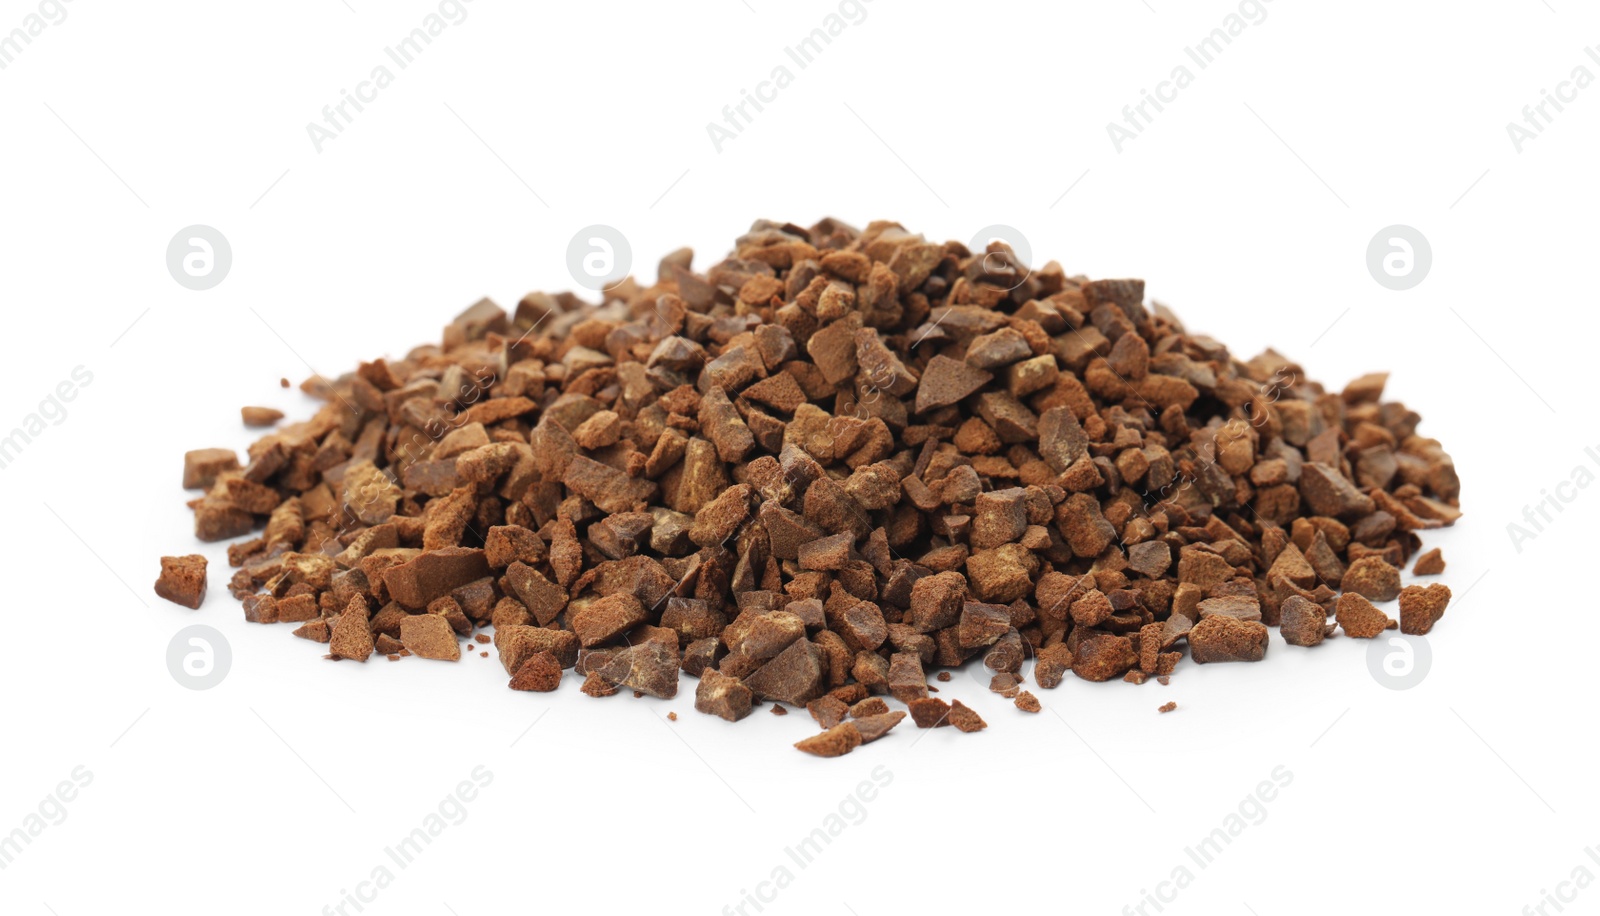 Photo of Pile of chicory granules isolated on white